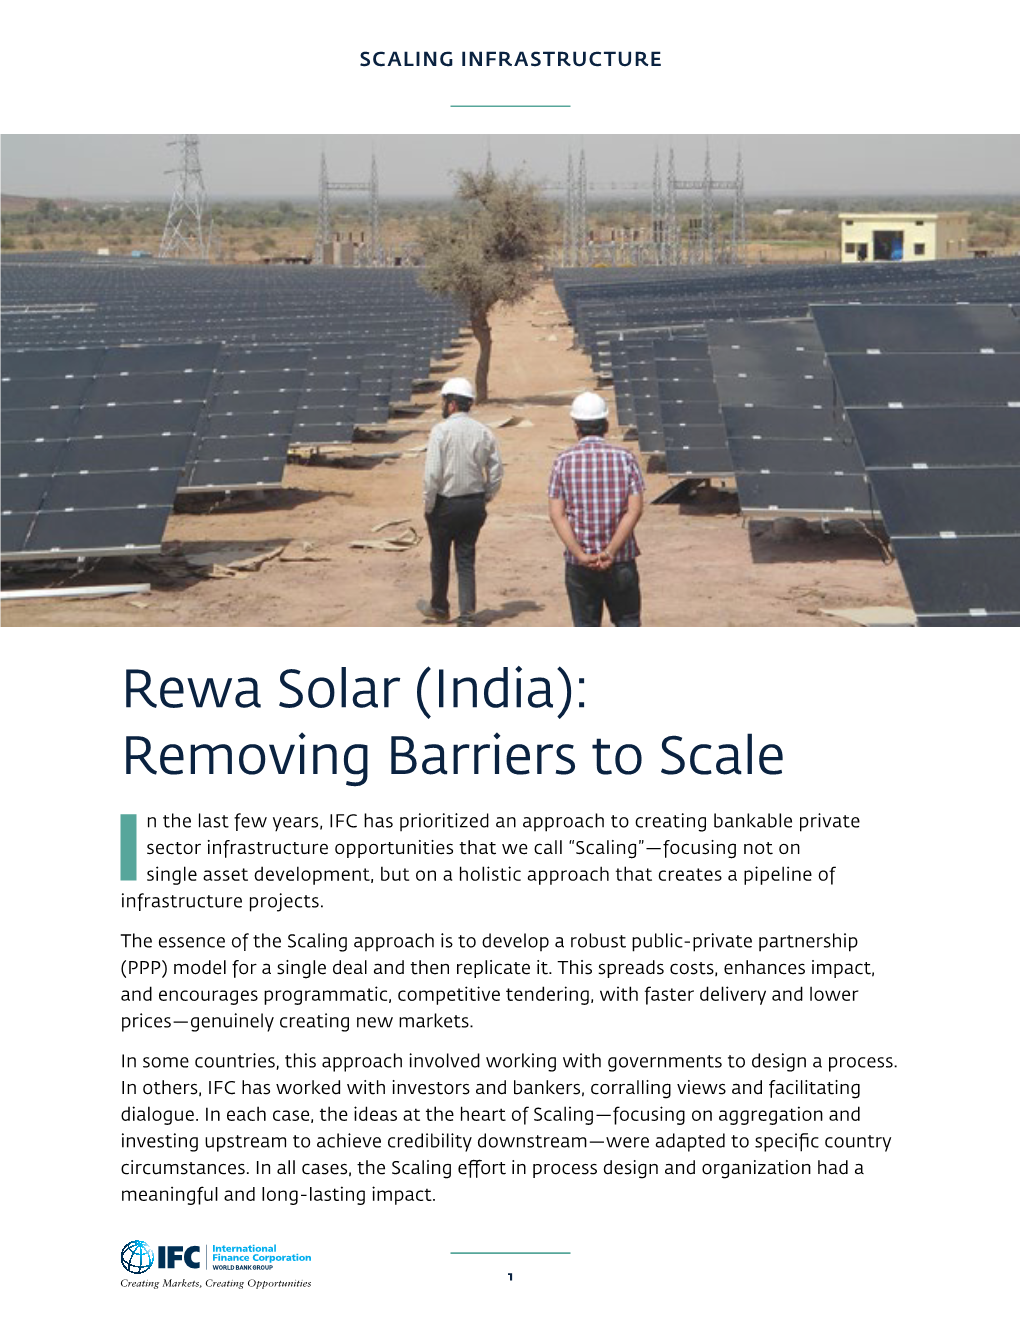 Rewa Solar (India): Removing Barriers to Scale